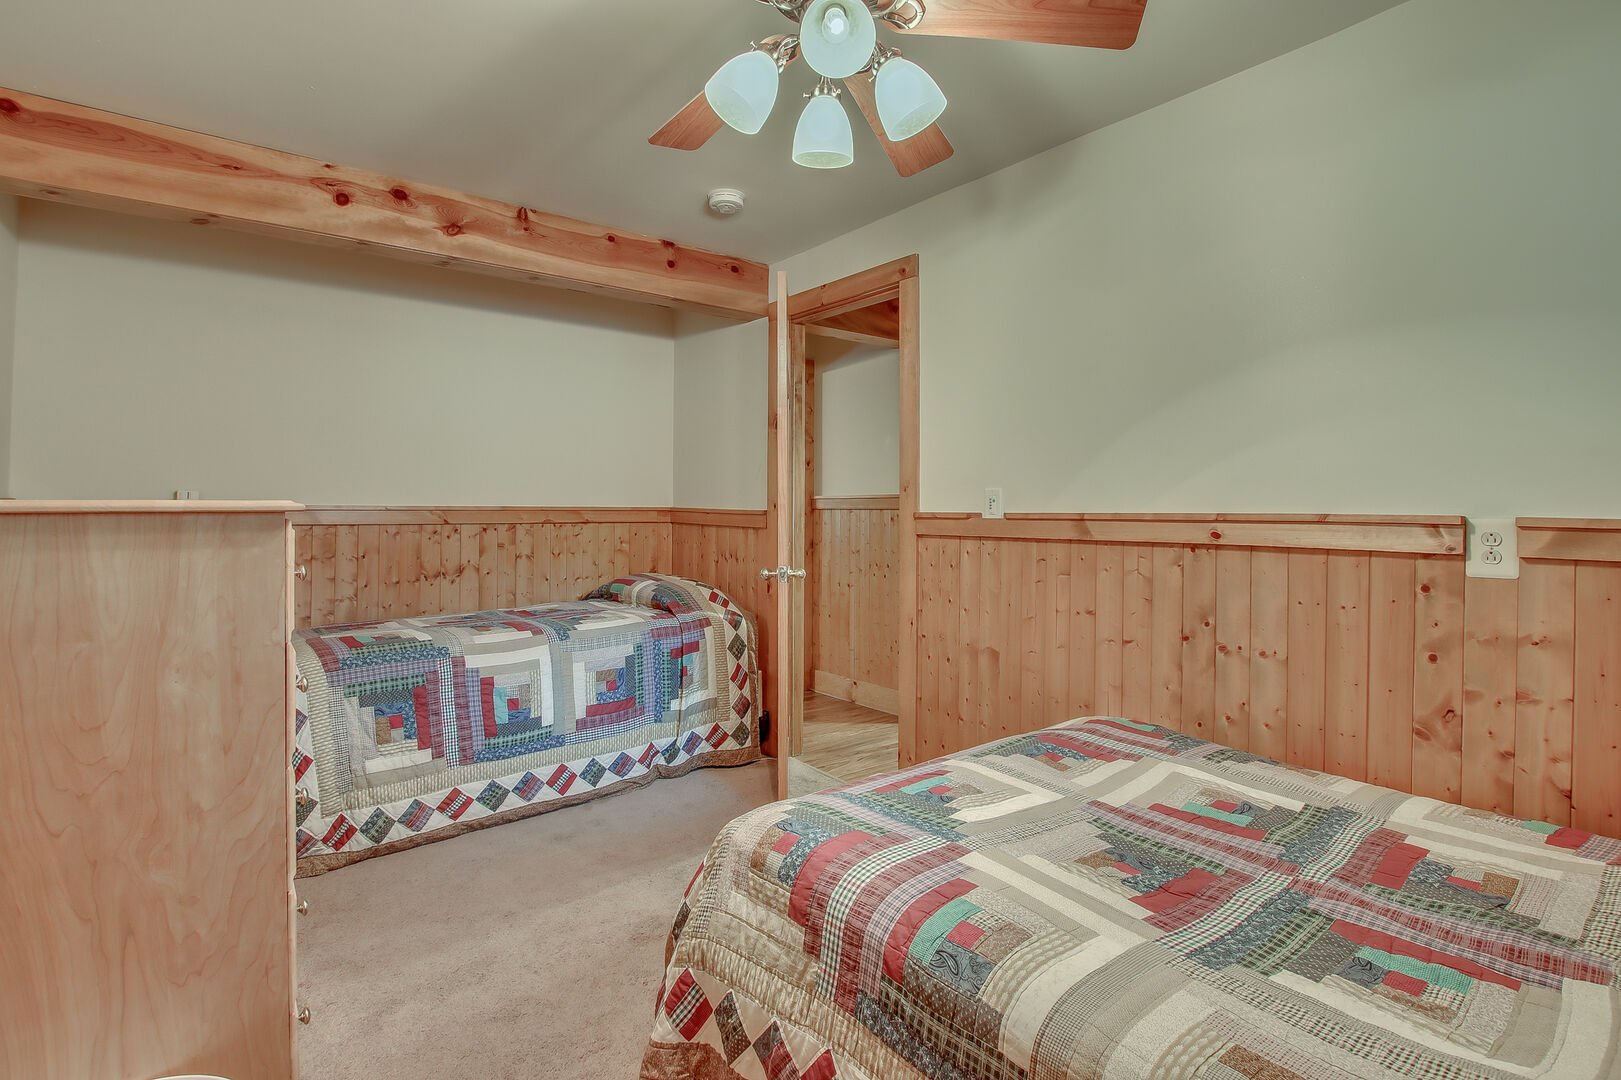 A quilt covered bed, couch, and the ceiling fan in one of this homes bedrooms.